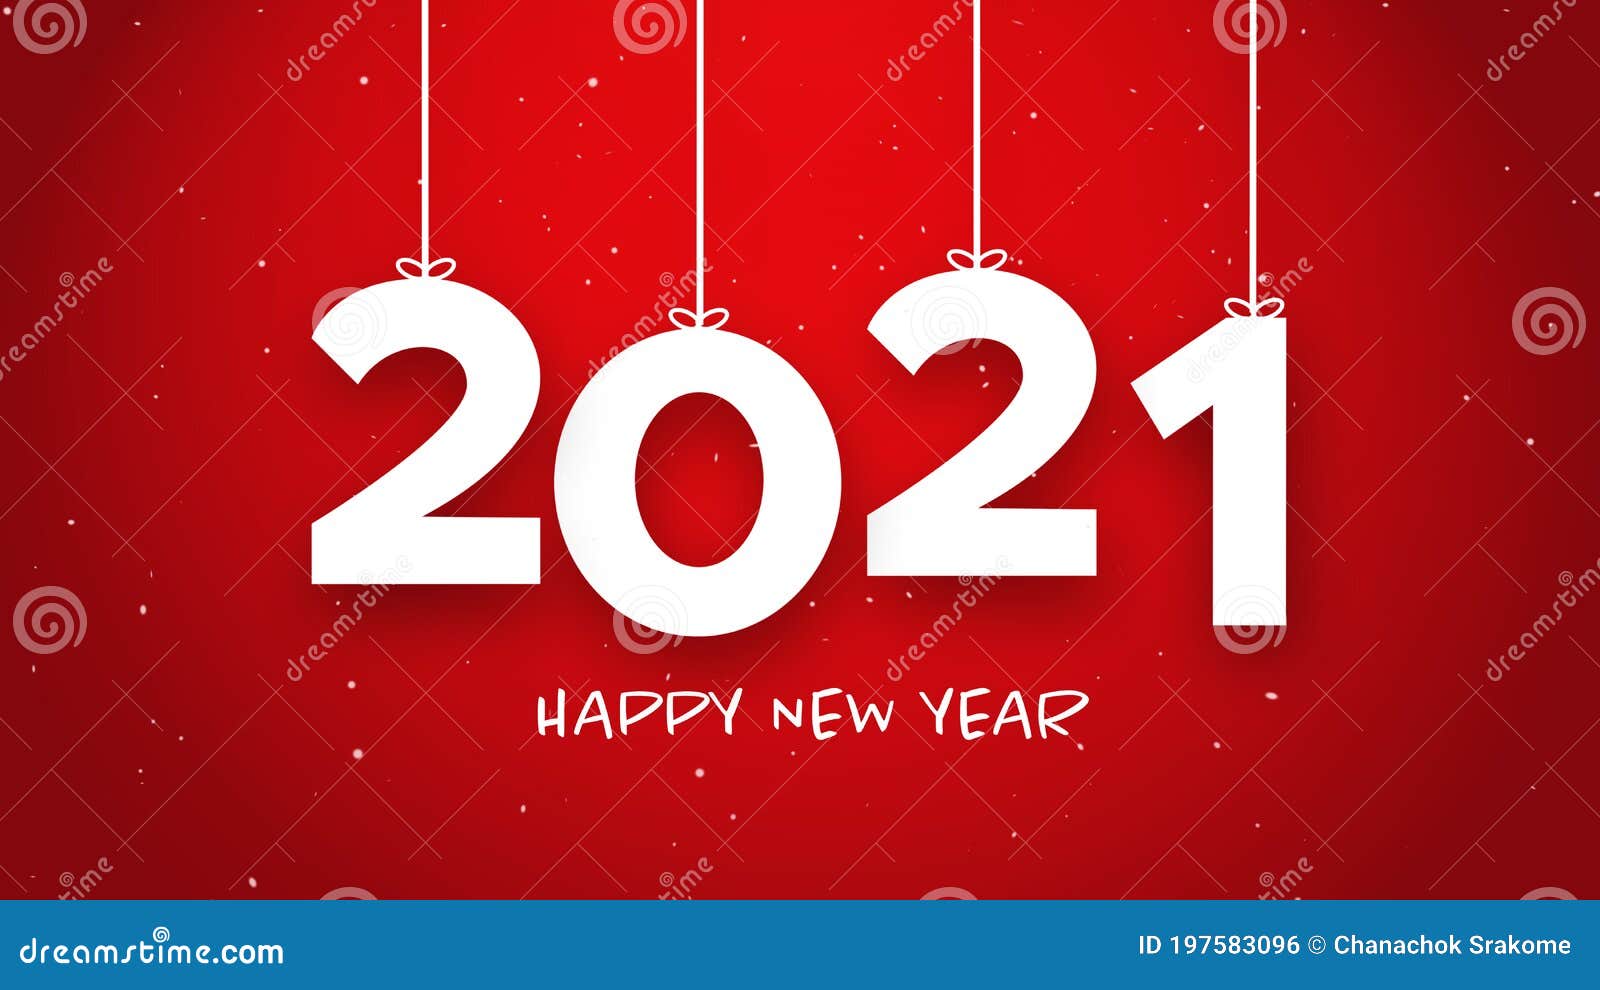 Happy New Year 2021 string red background